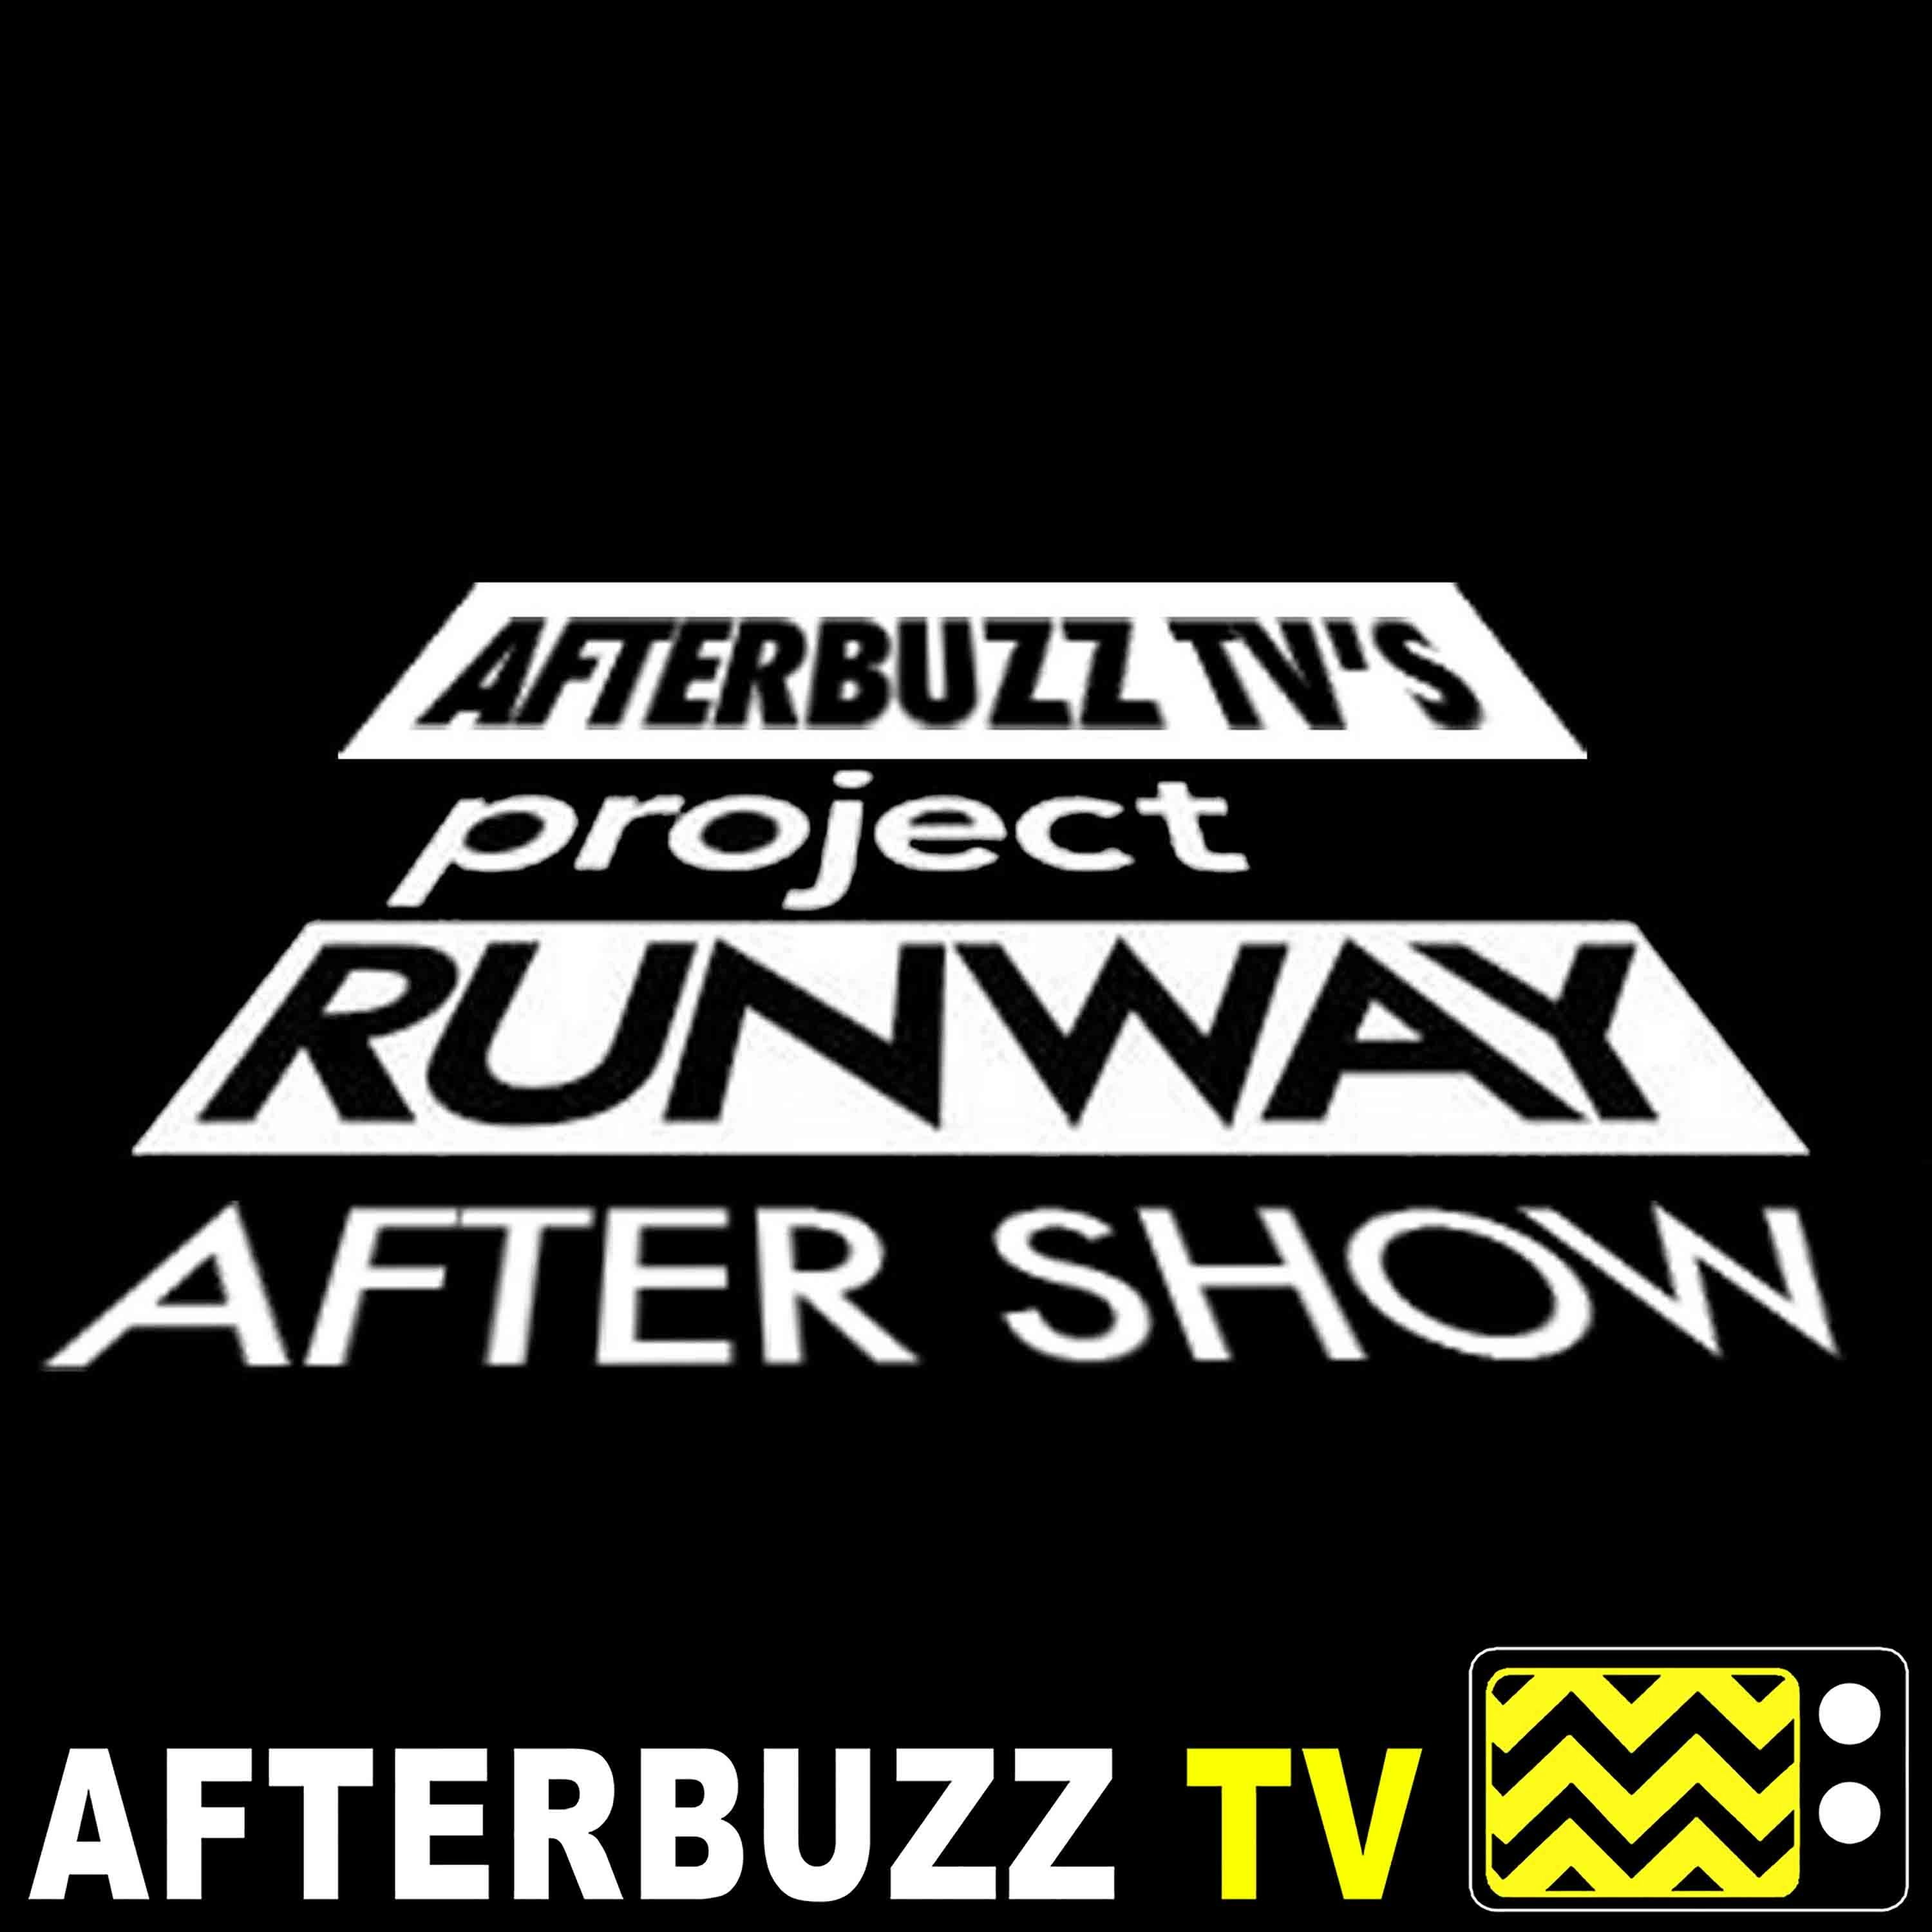 Project Runway All Stars S:6 | History in the Making E:12 | AfterBuzz TV AfterShow